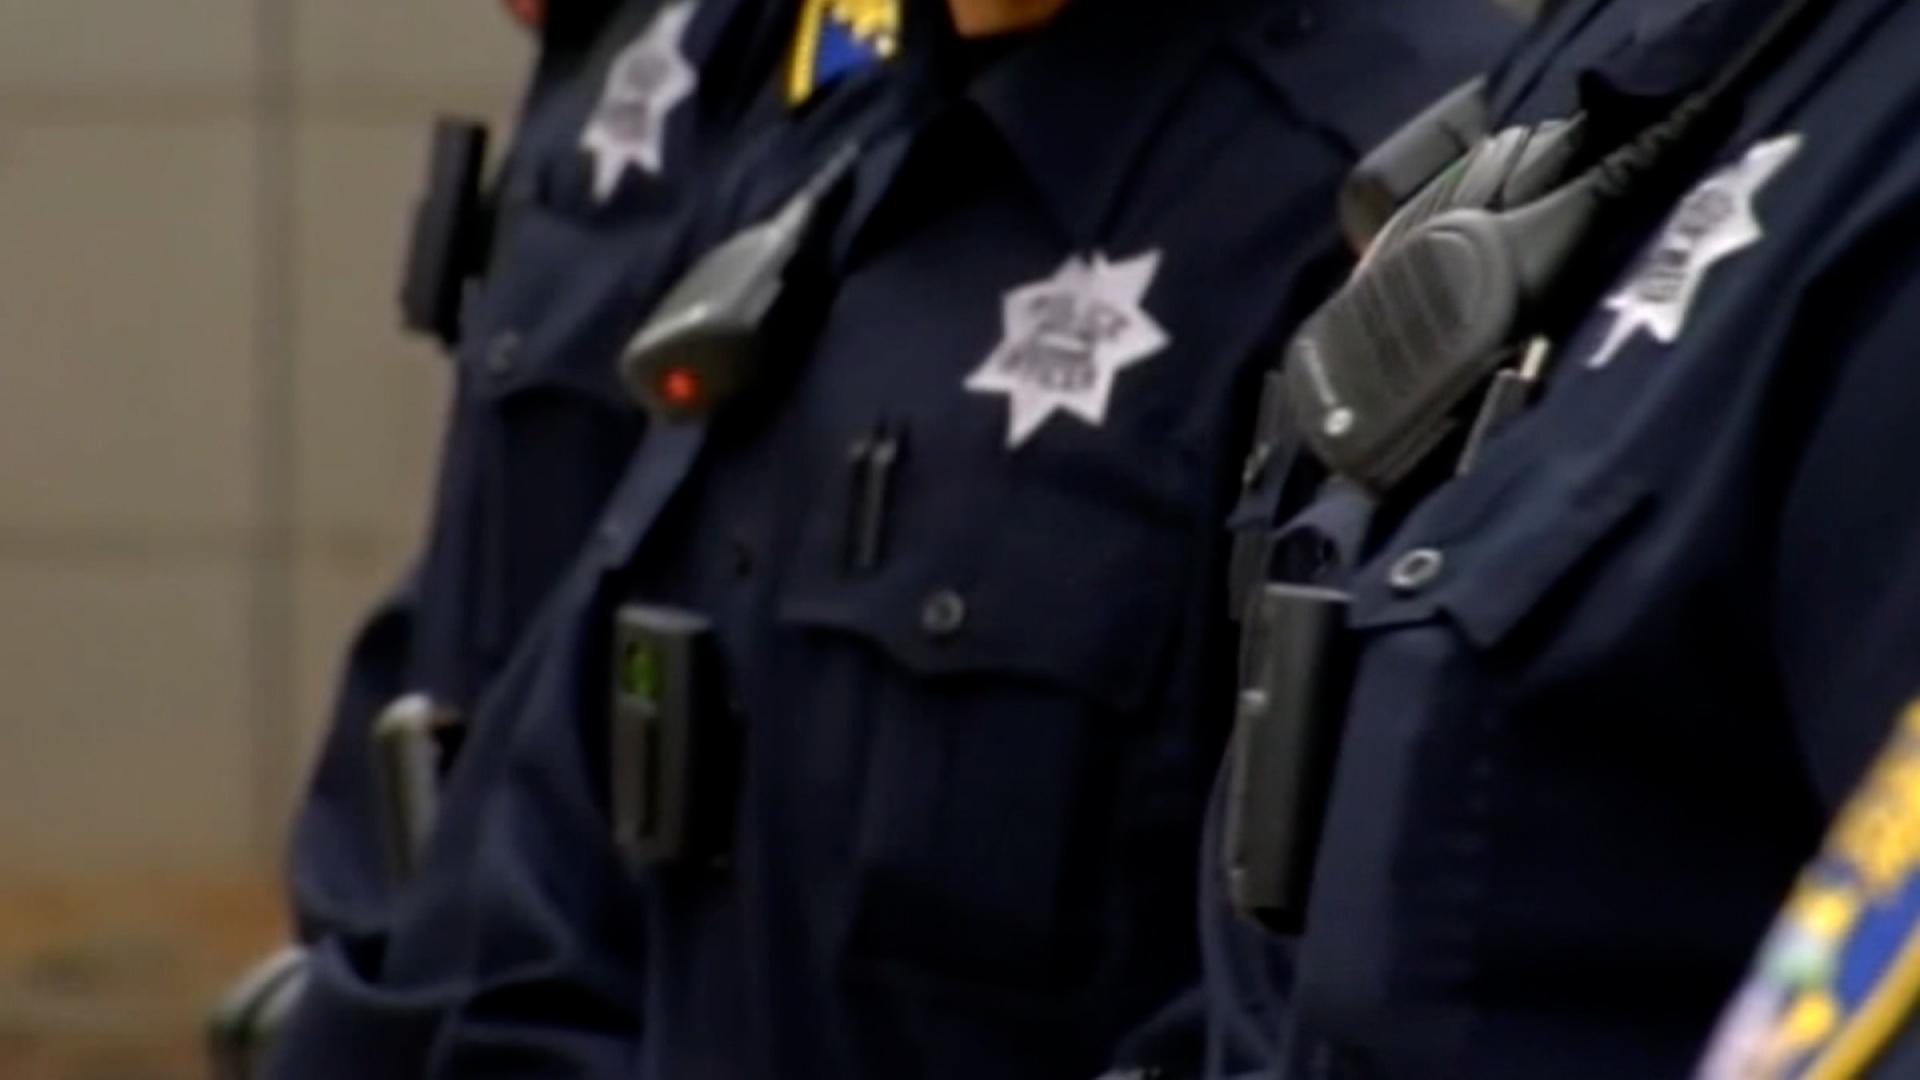 The coronavirus has become the leading cause of death for officers despite law enforcement being among the first groups eligible to receive the vaccine at the end of 2020. (Credit: KGO)